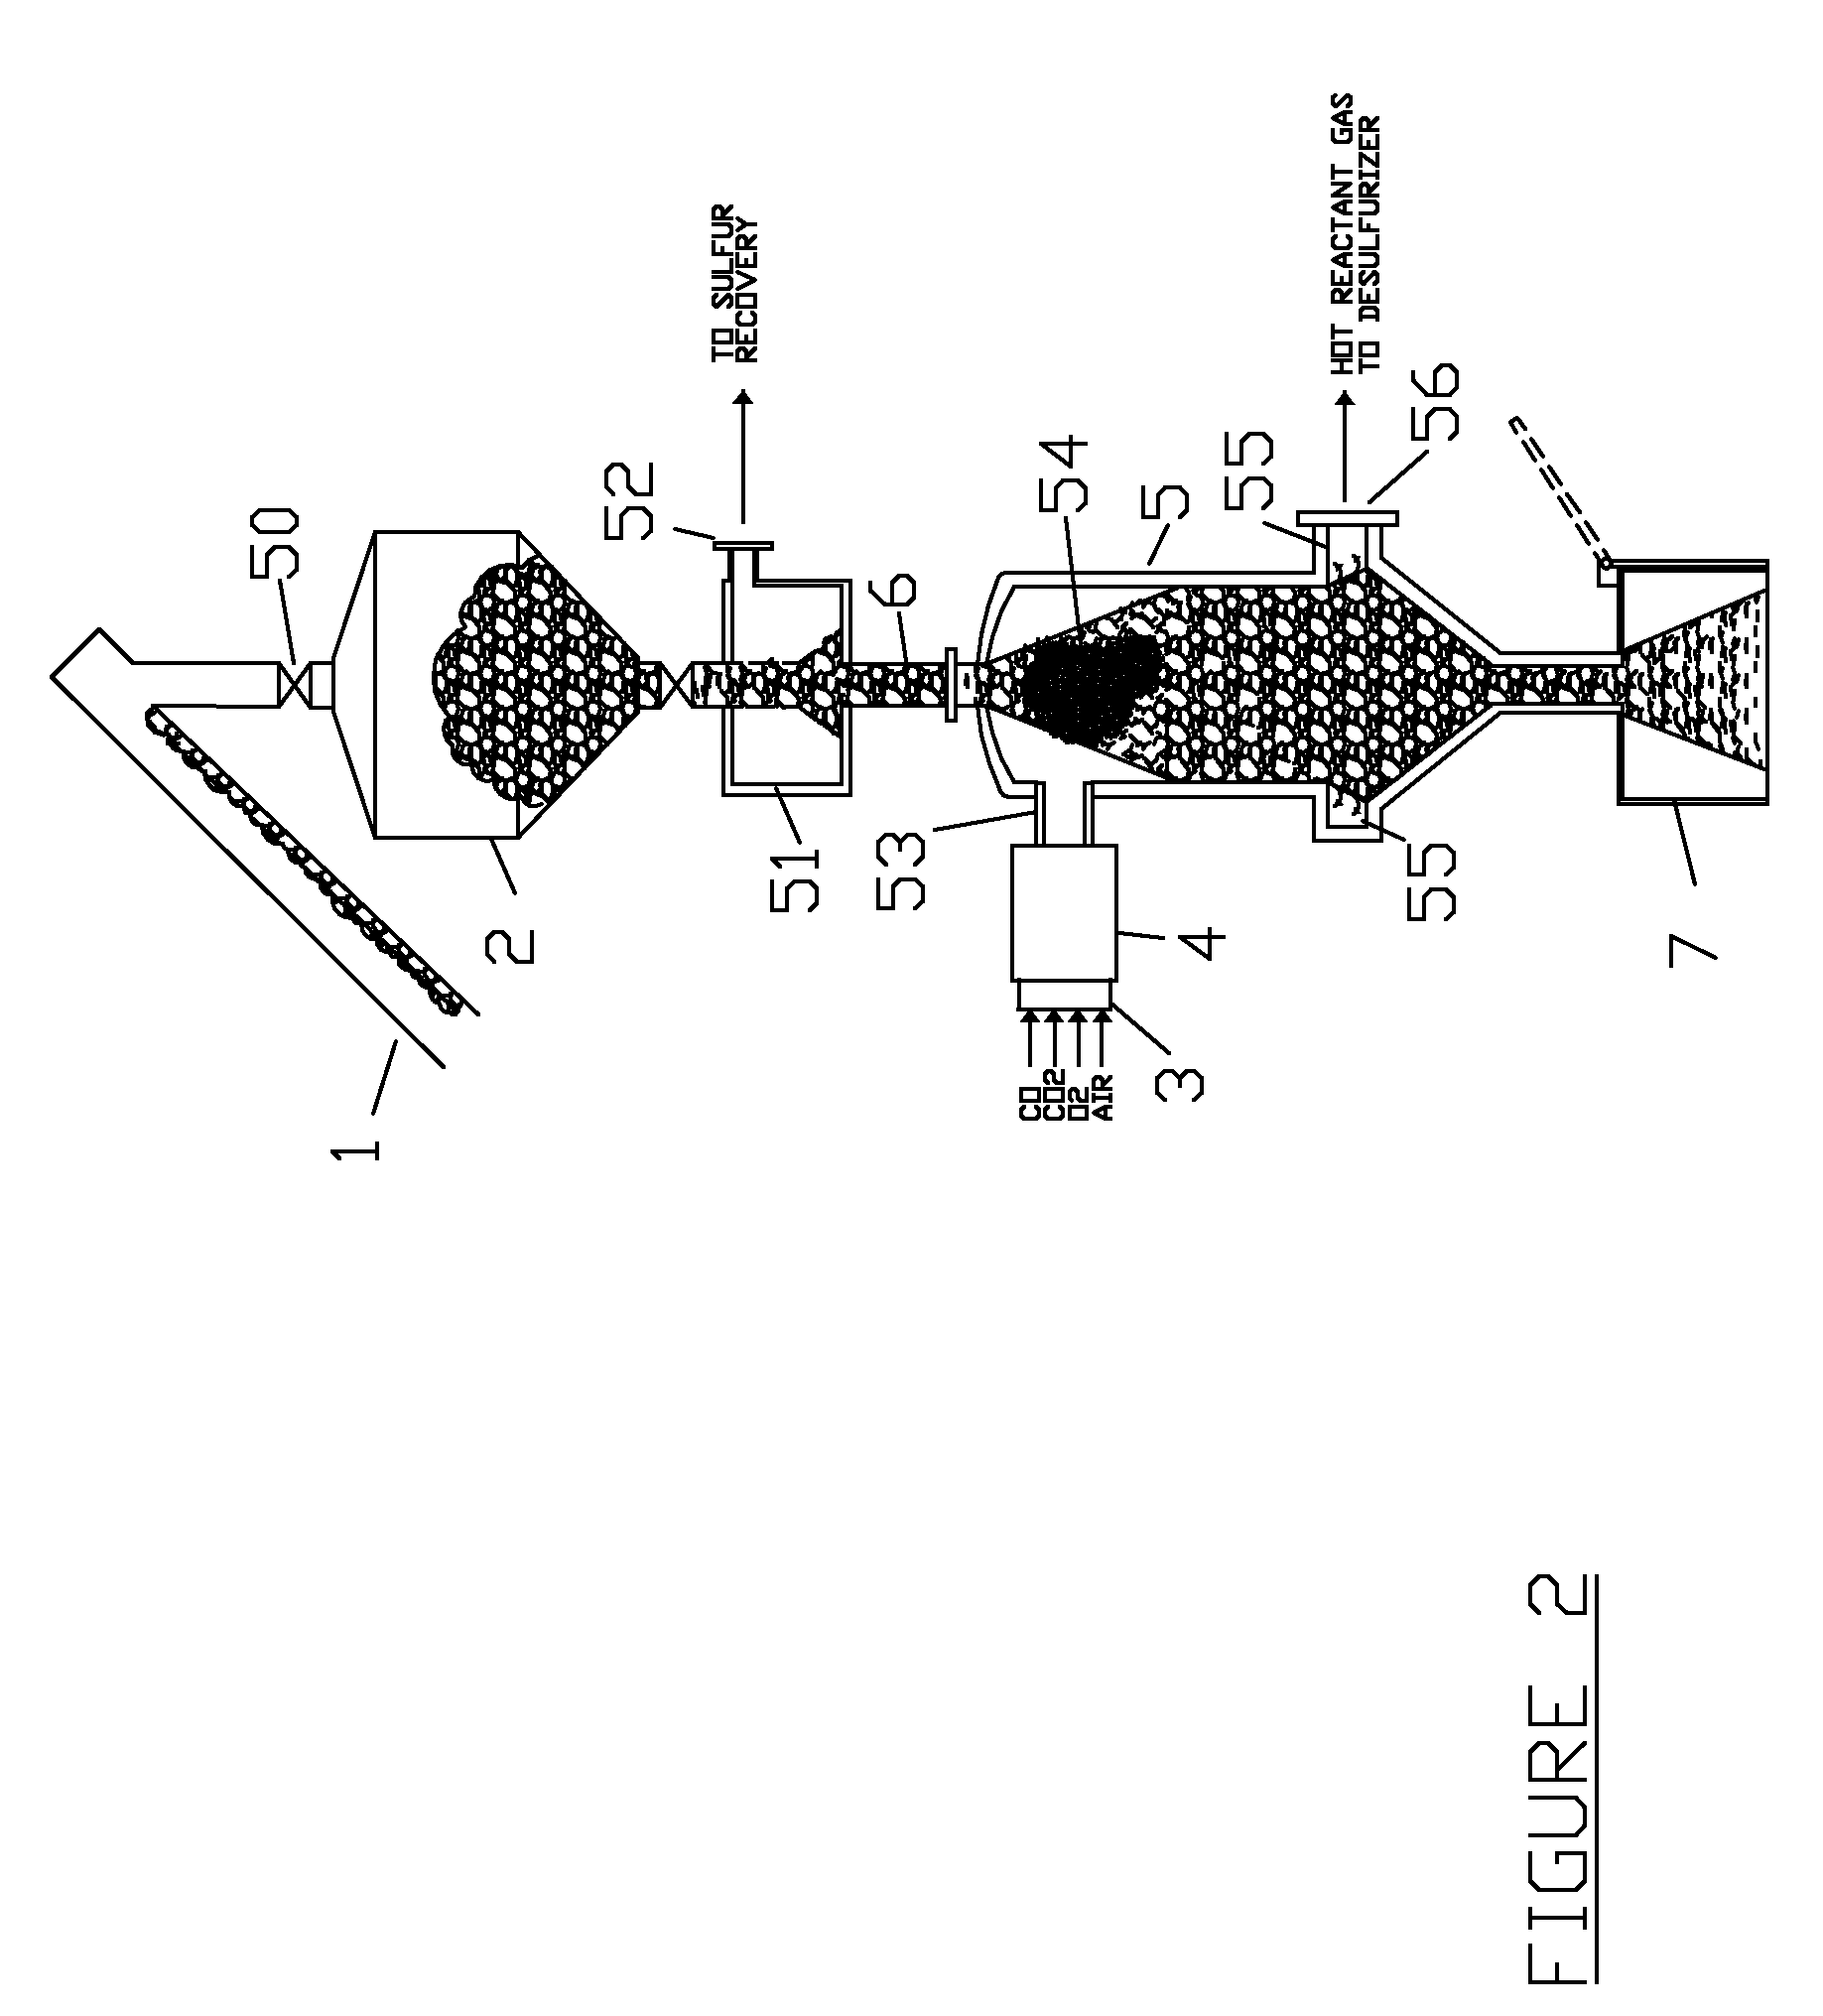 CO Generator and Process for Desulfurizing Solid Carbon-based Fuels